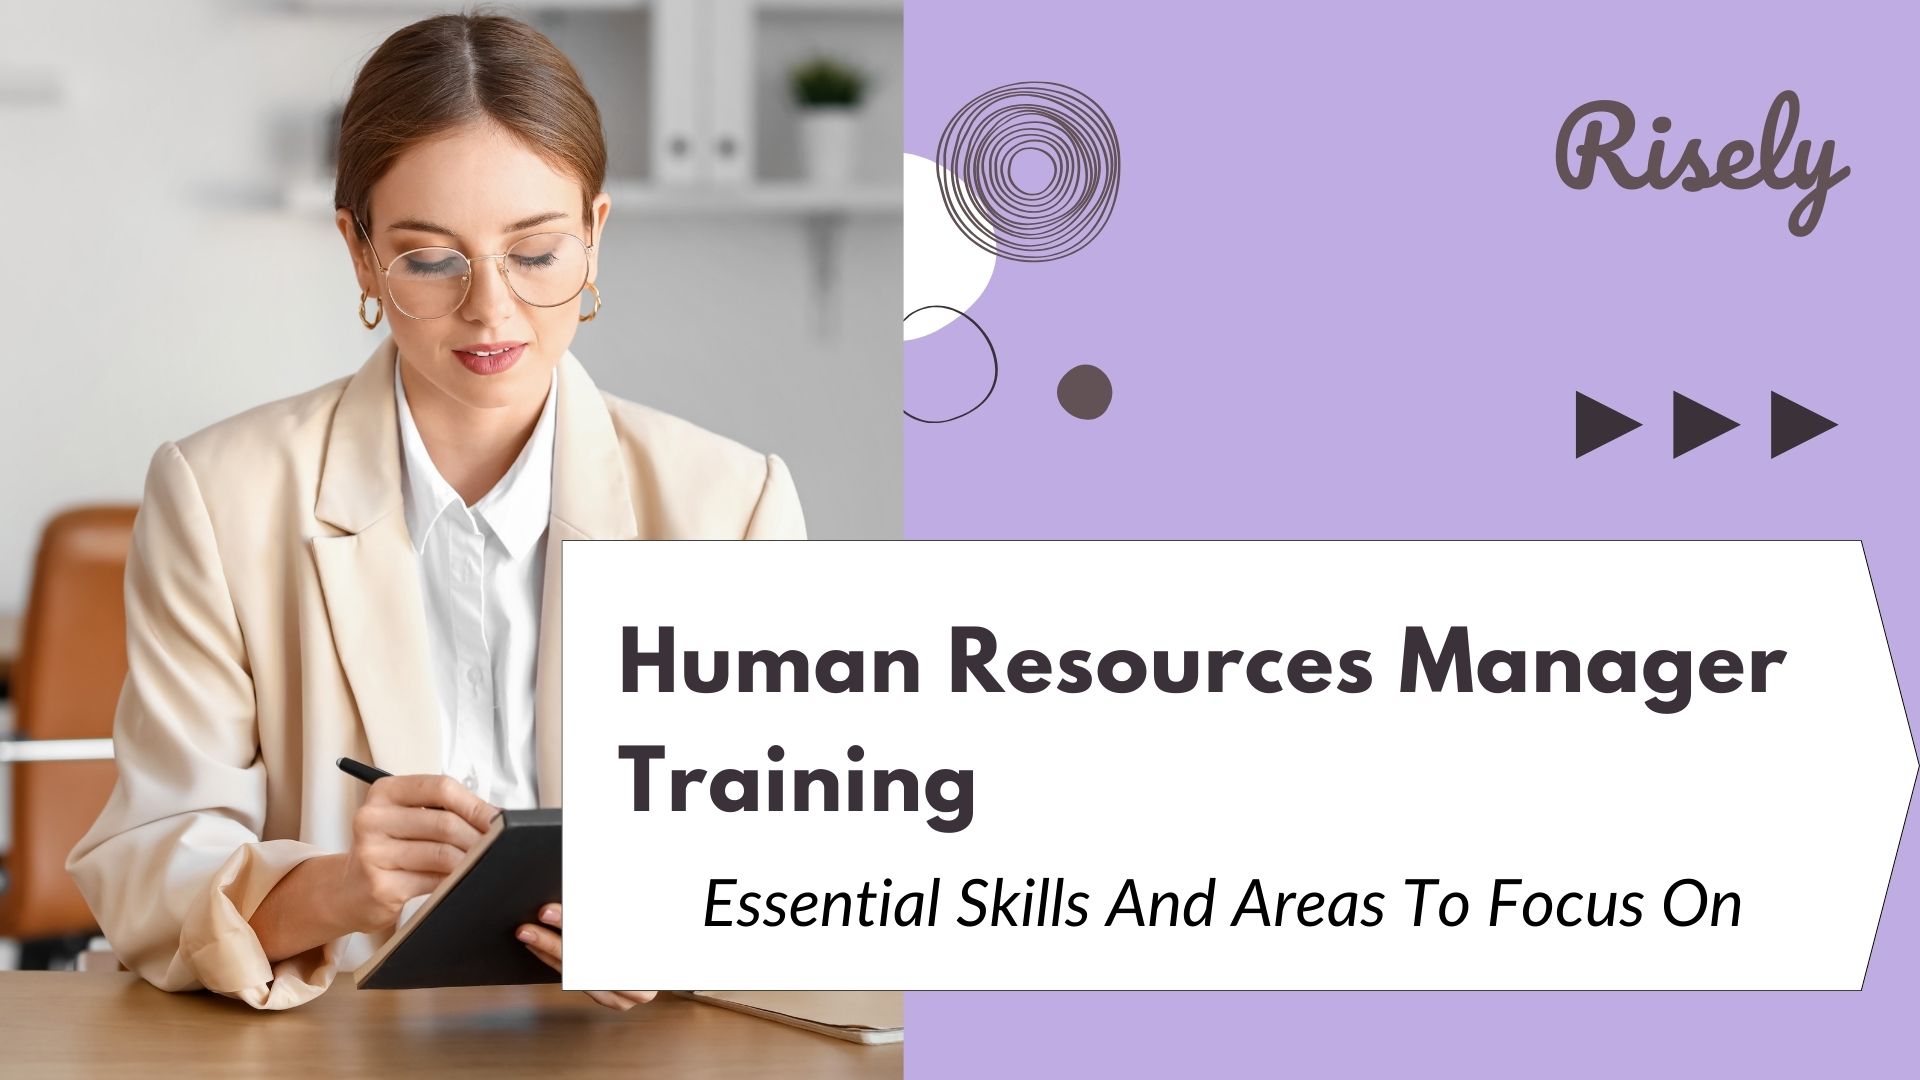 Human Resources Manager Training: Essential Skills And Areas To Focus On